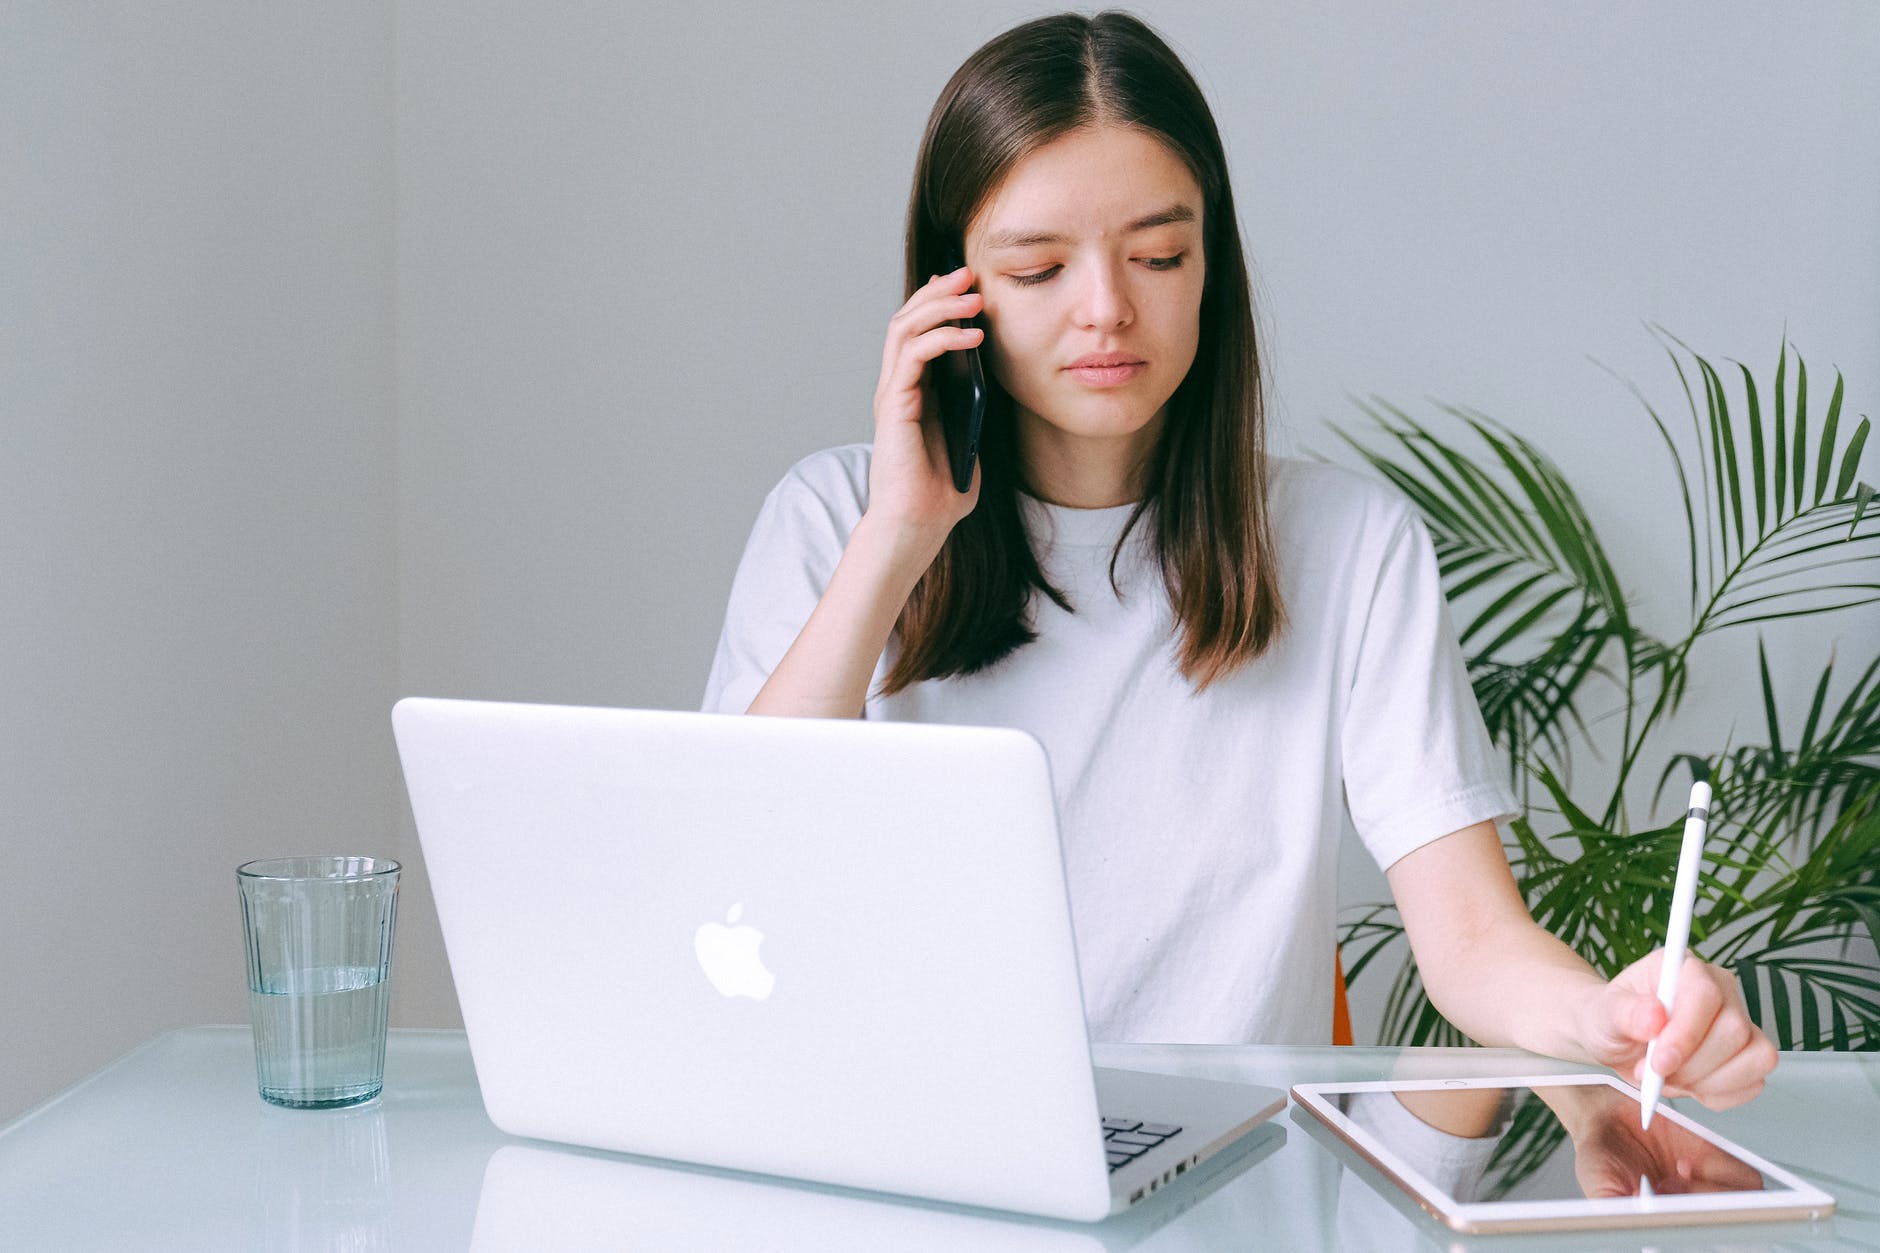 A young woman on her phone with a laptop in front of her. | Source: Pexels